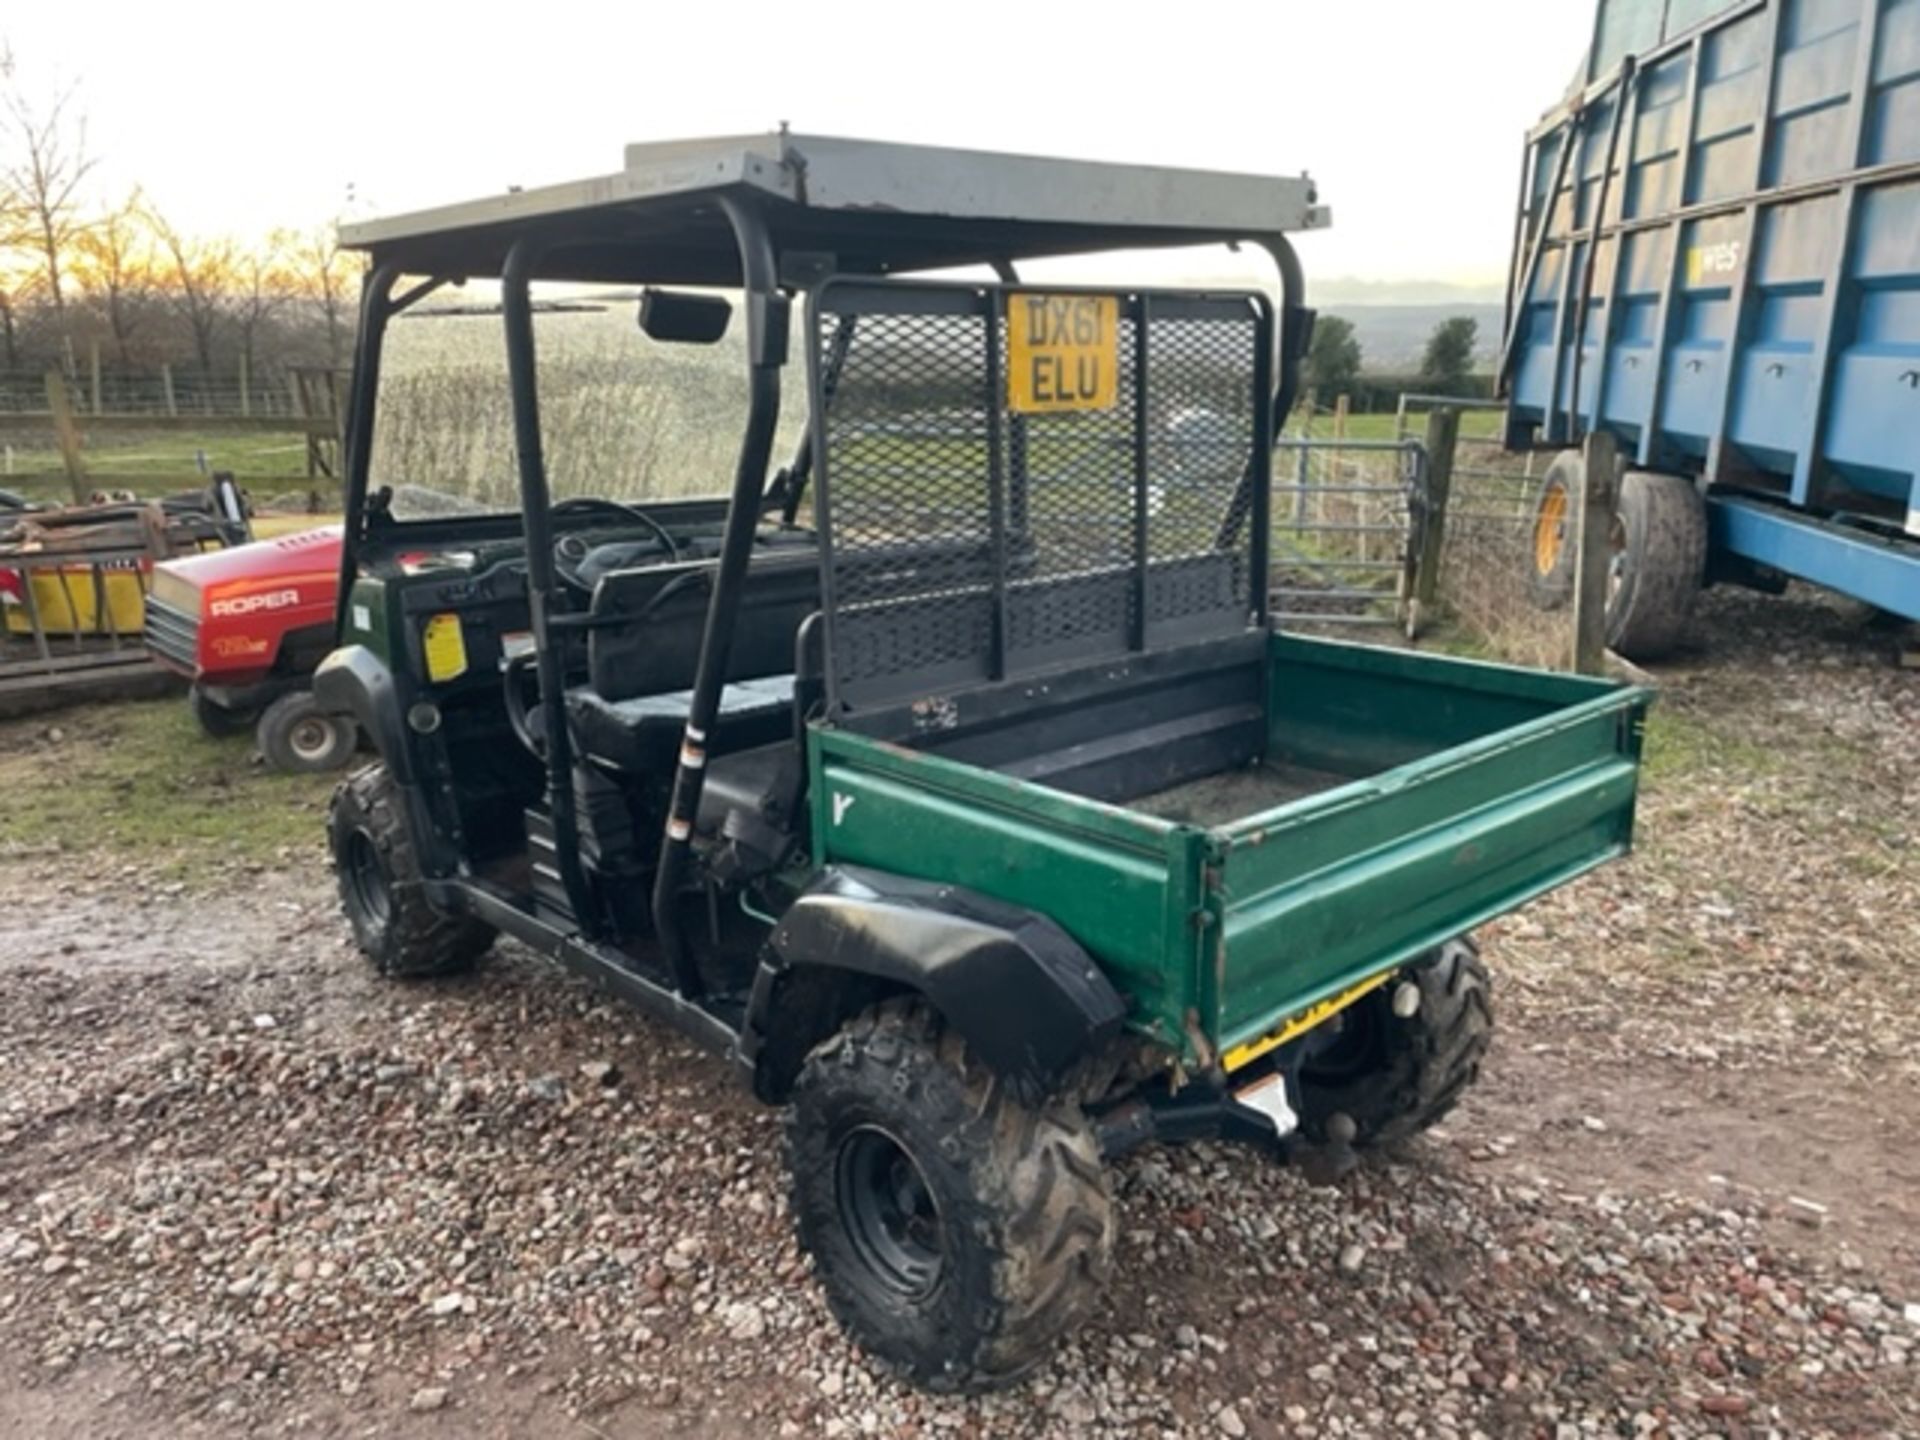 KAWASAKI MULE 4010, REAR SEATS FOLD AND TURSN INTO 2 SEATER WITH EXTENDED BED, 1983 HOURS *PLUS VAT* - Image 4 of 8